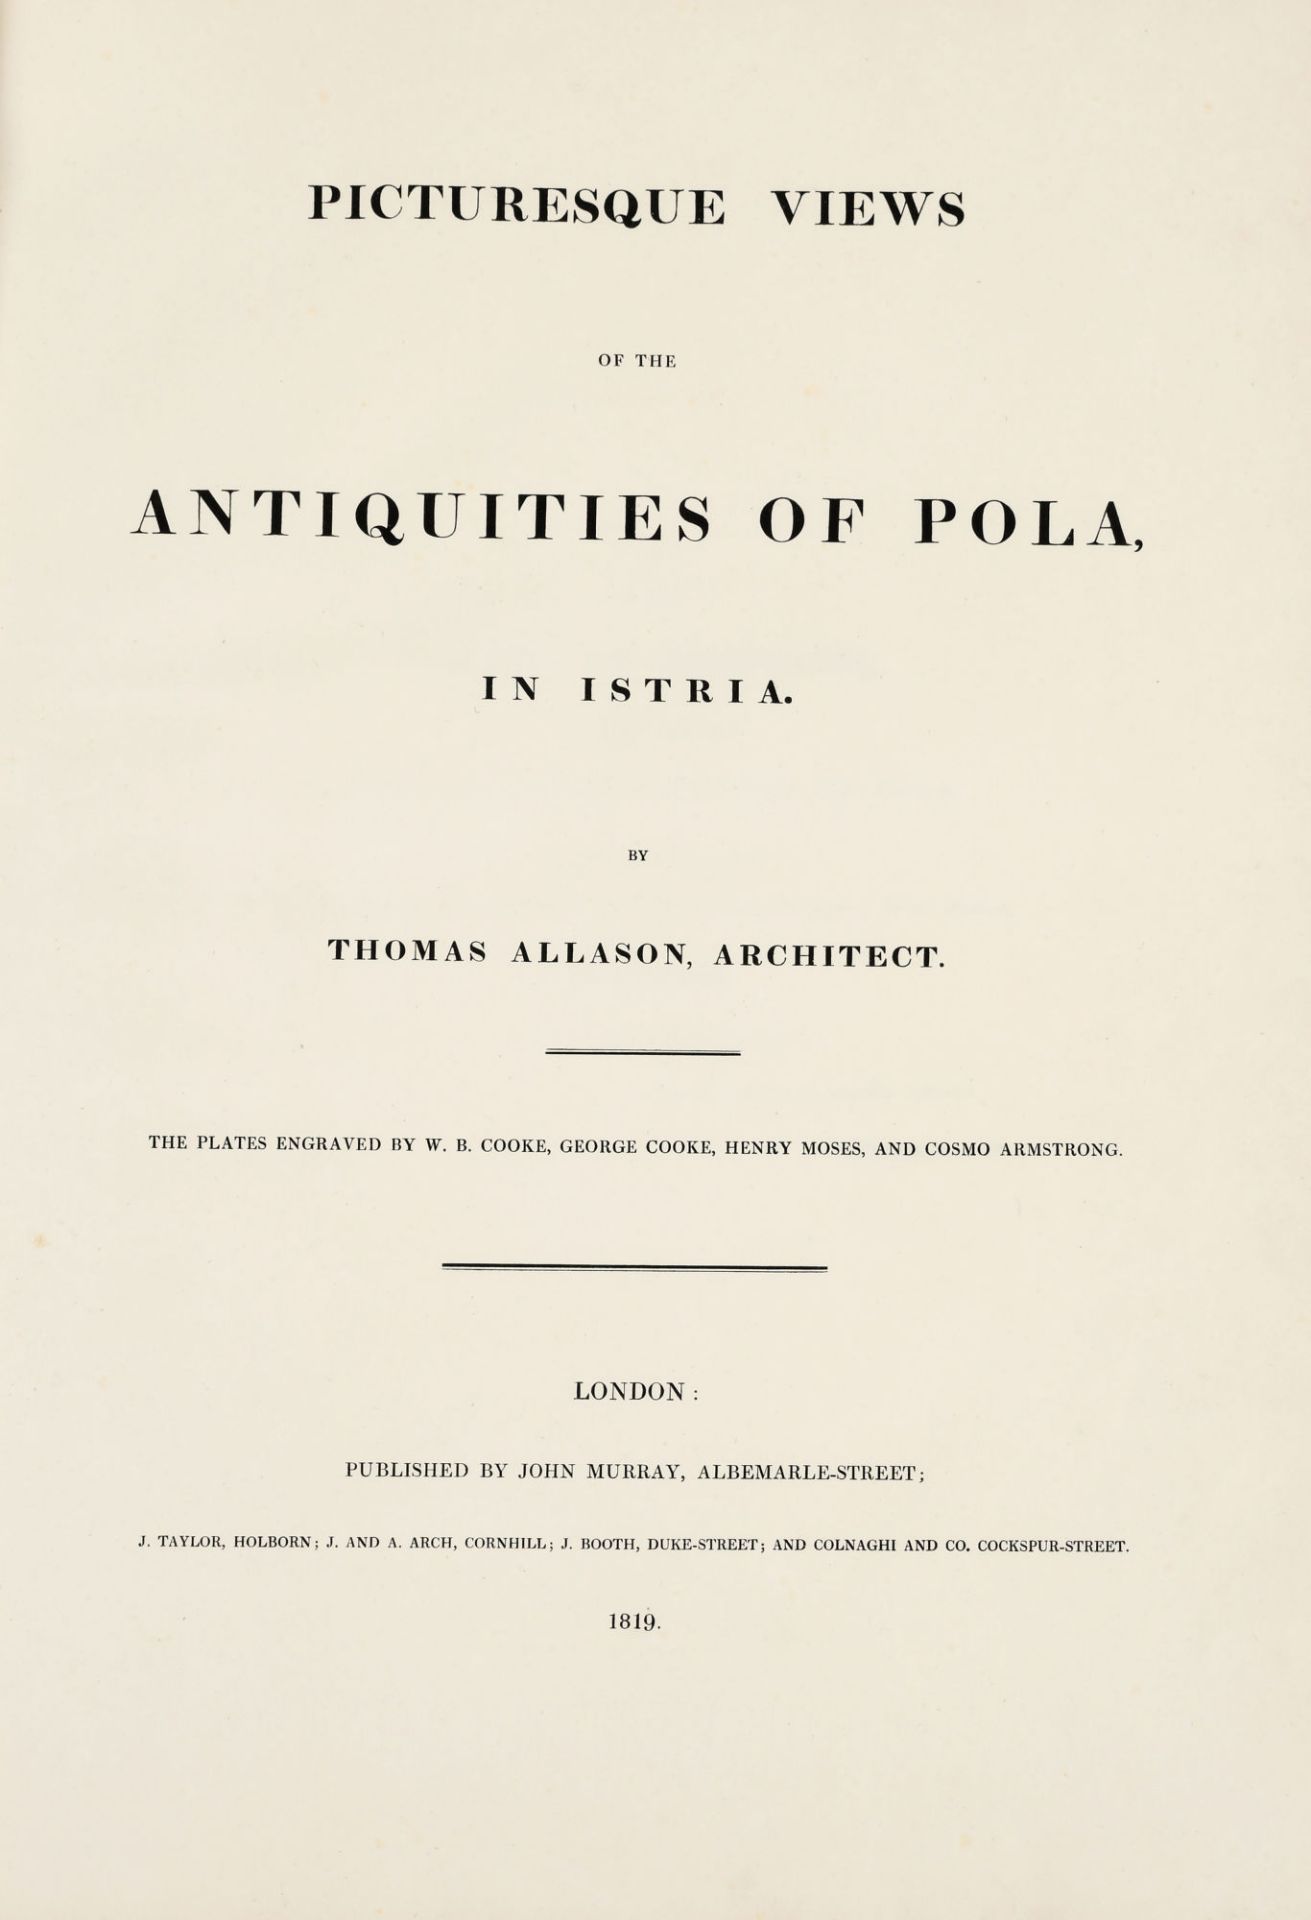 ALLASON, THOMAS: "Picturesque Views of the Antiquities of Pola, in Istria".